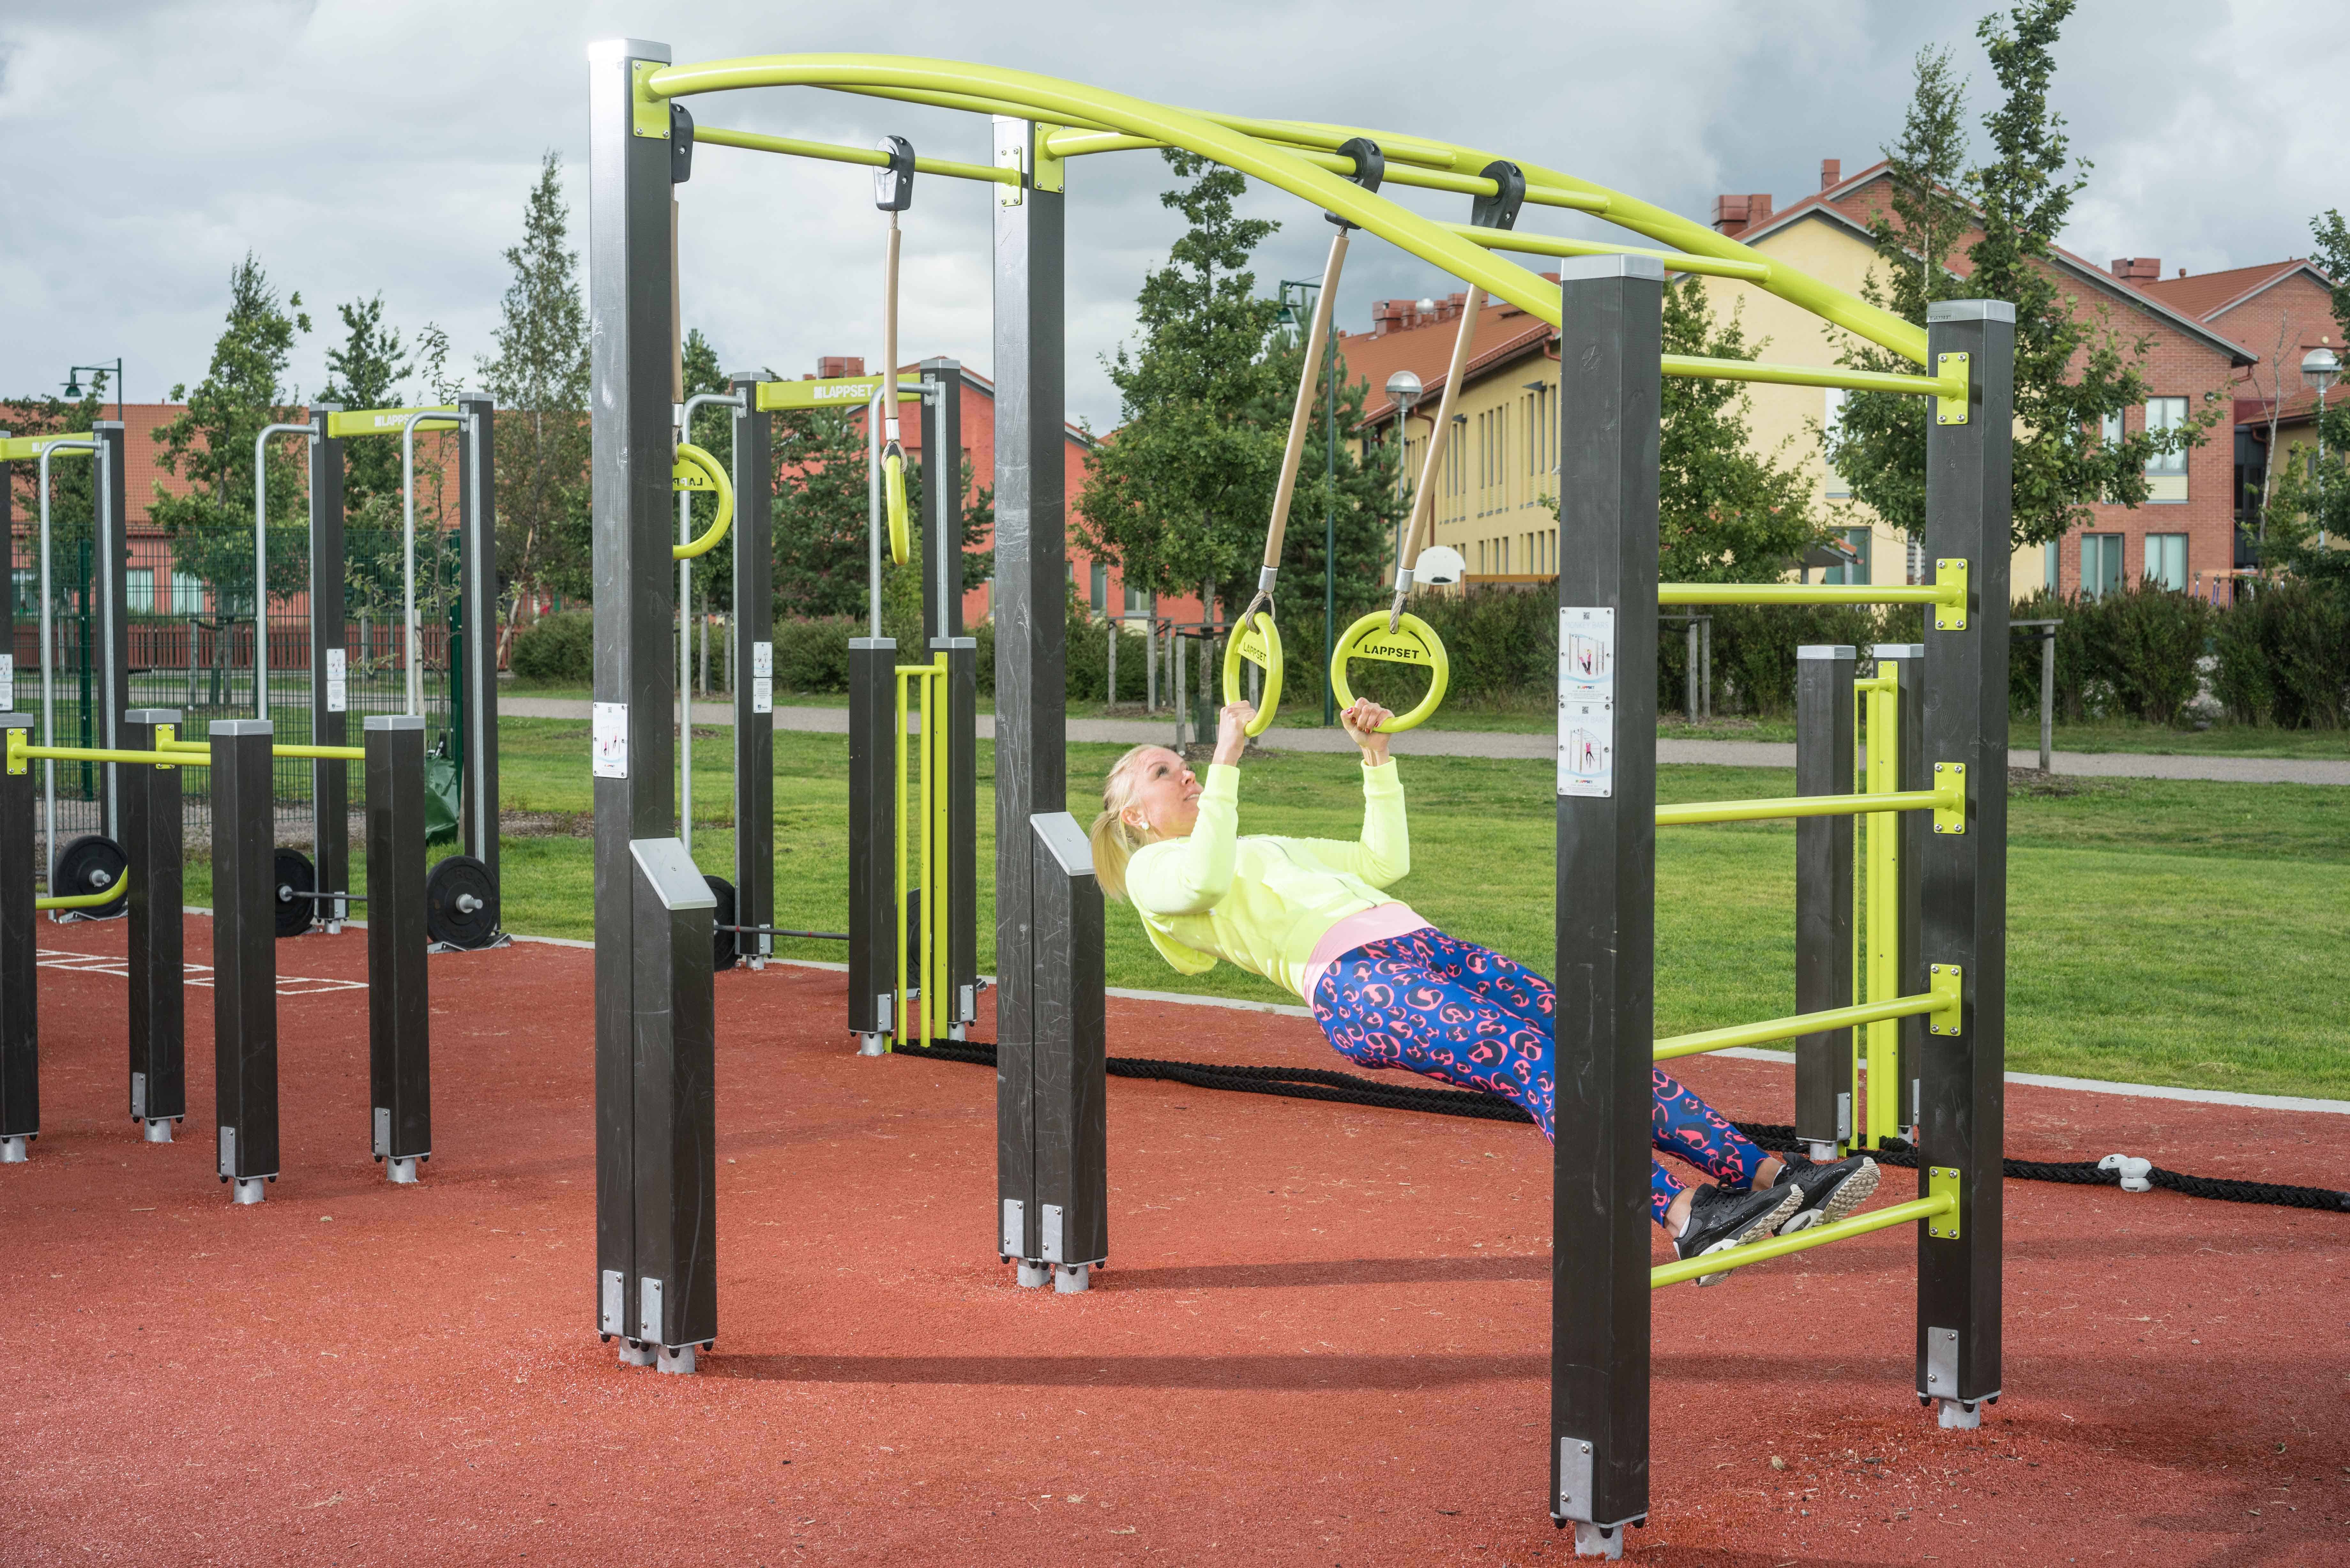 The Benefits of Outdoor Fitness Parks